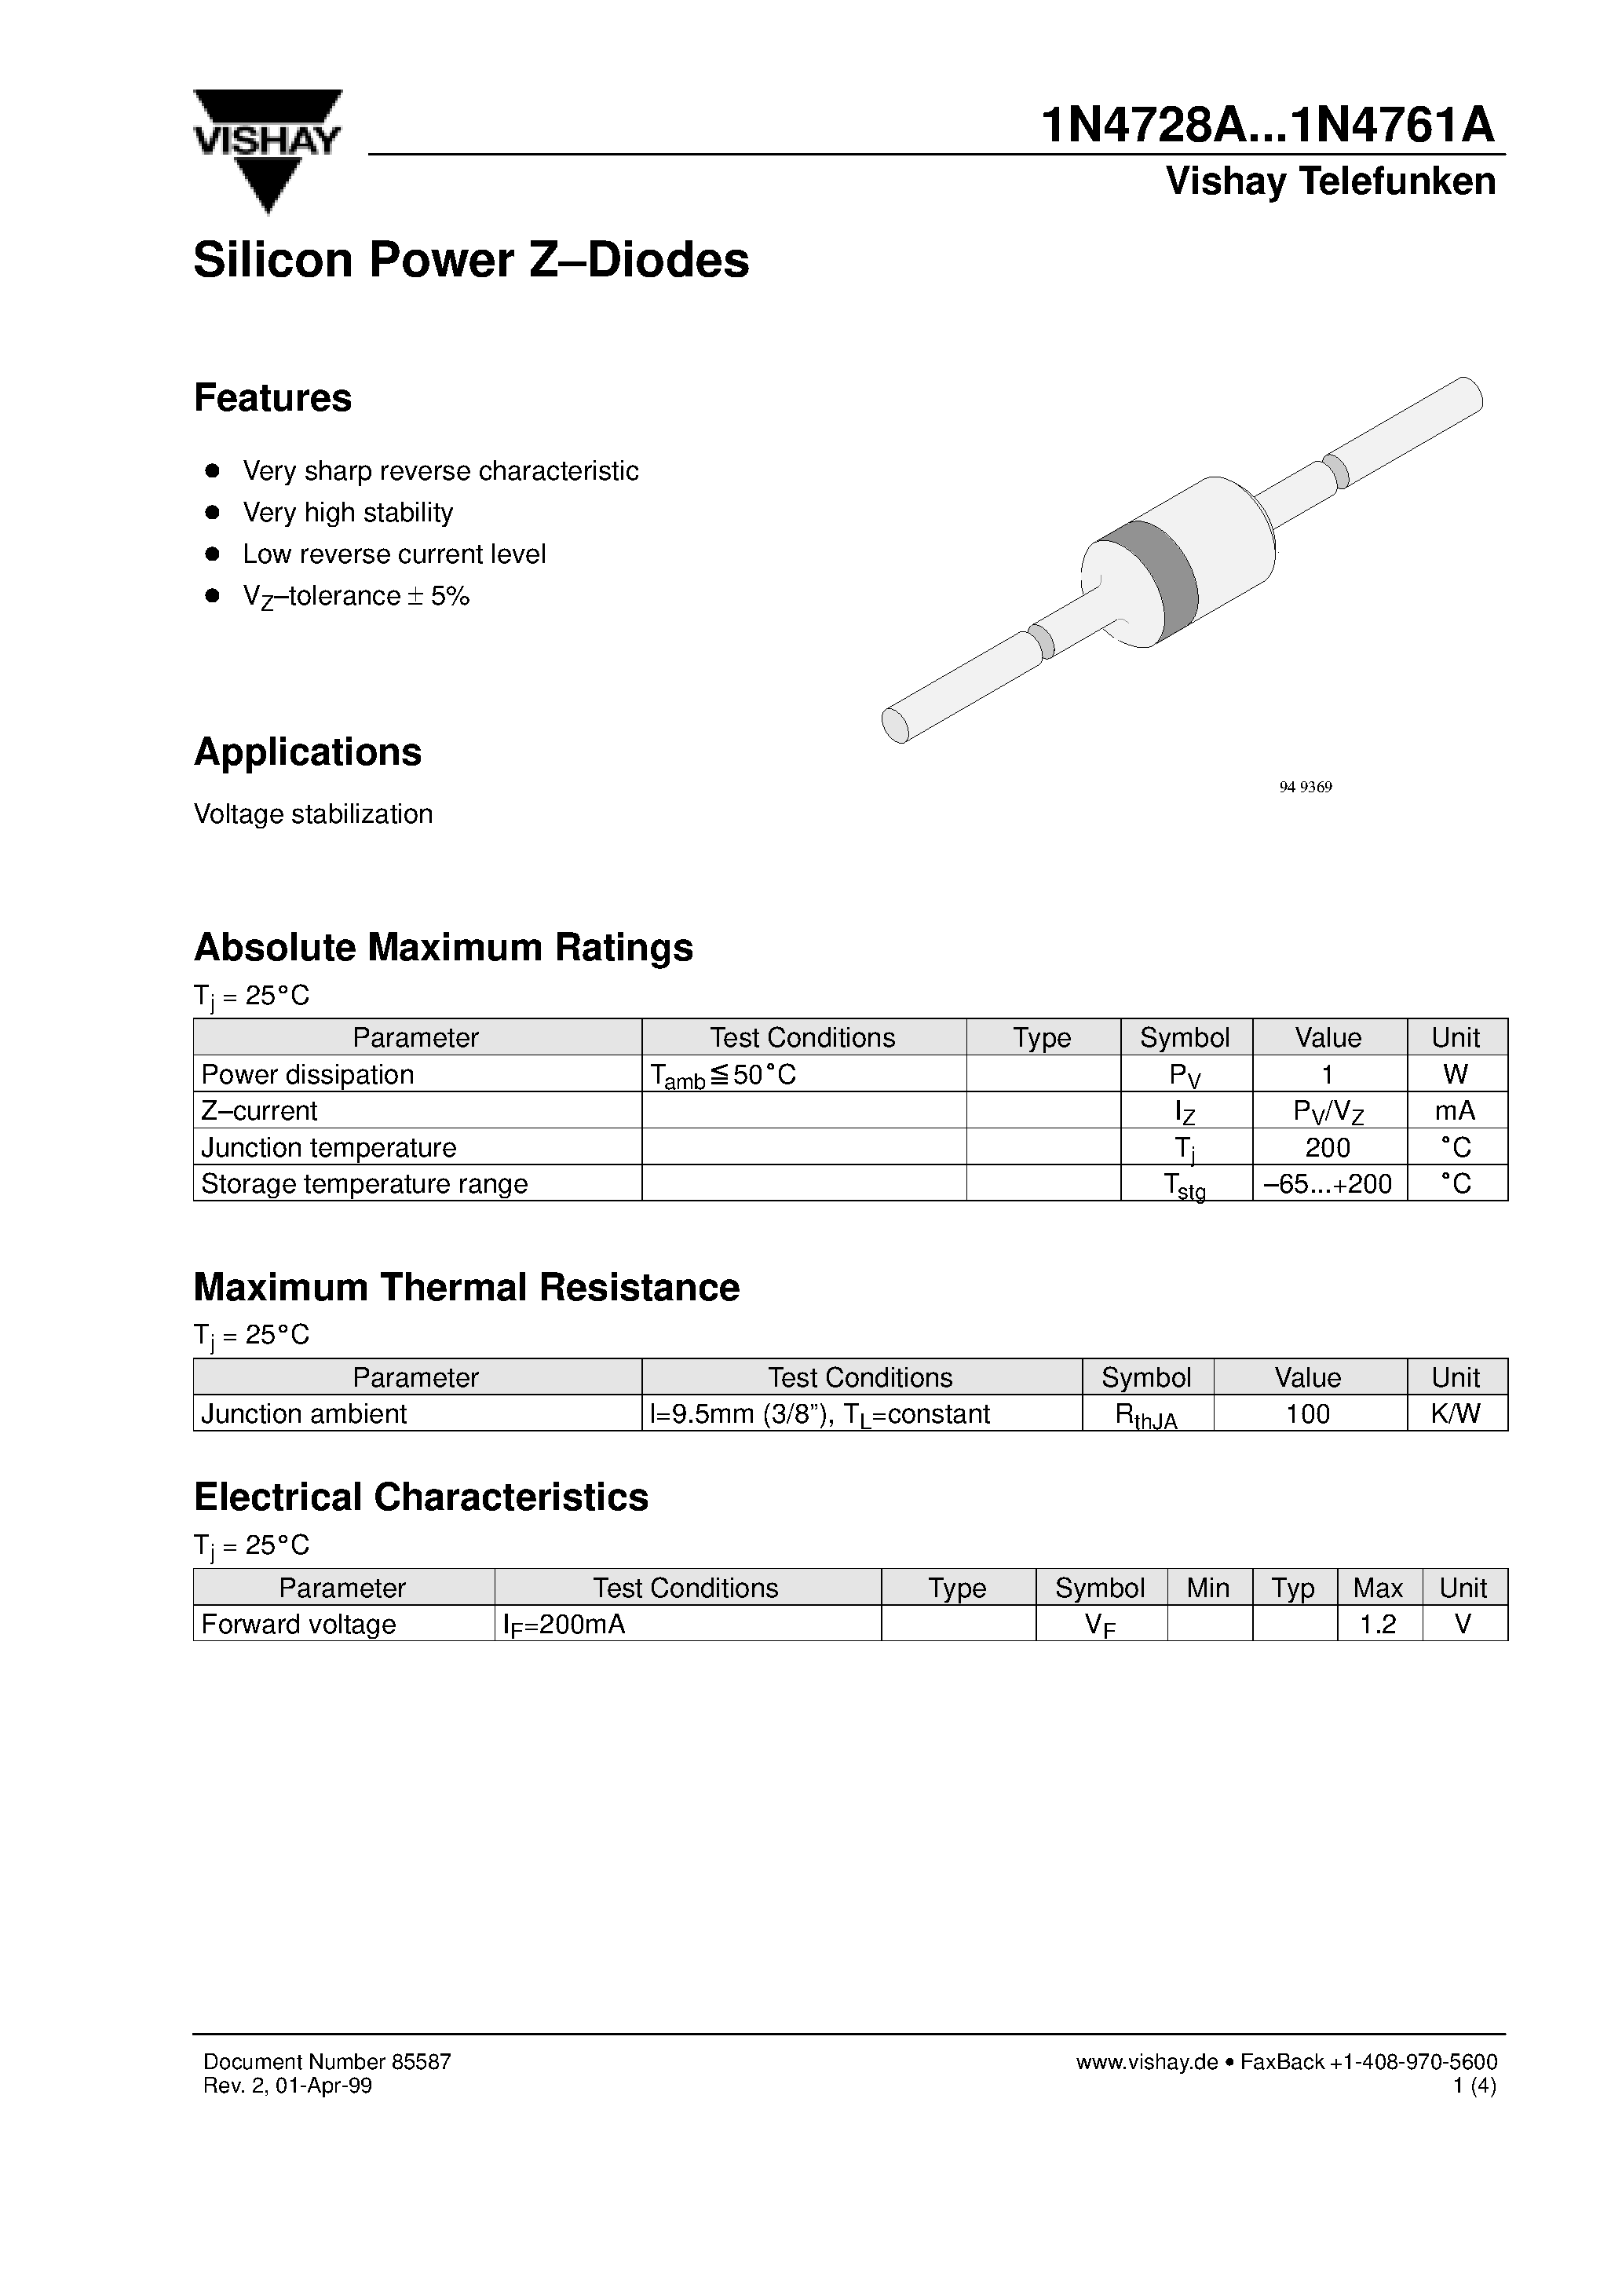 Даташит 1N4728 - Silicon Power Z-Diodes страница 1